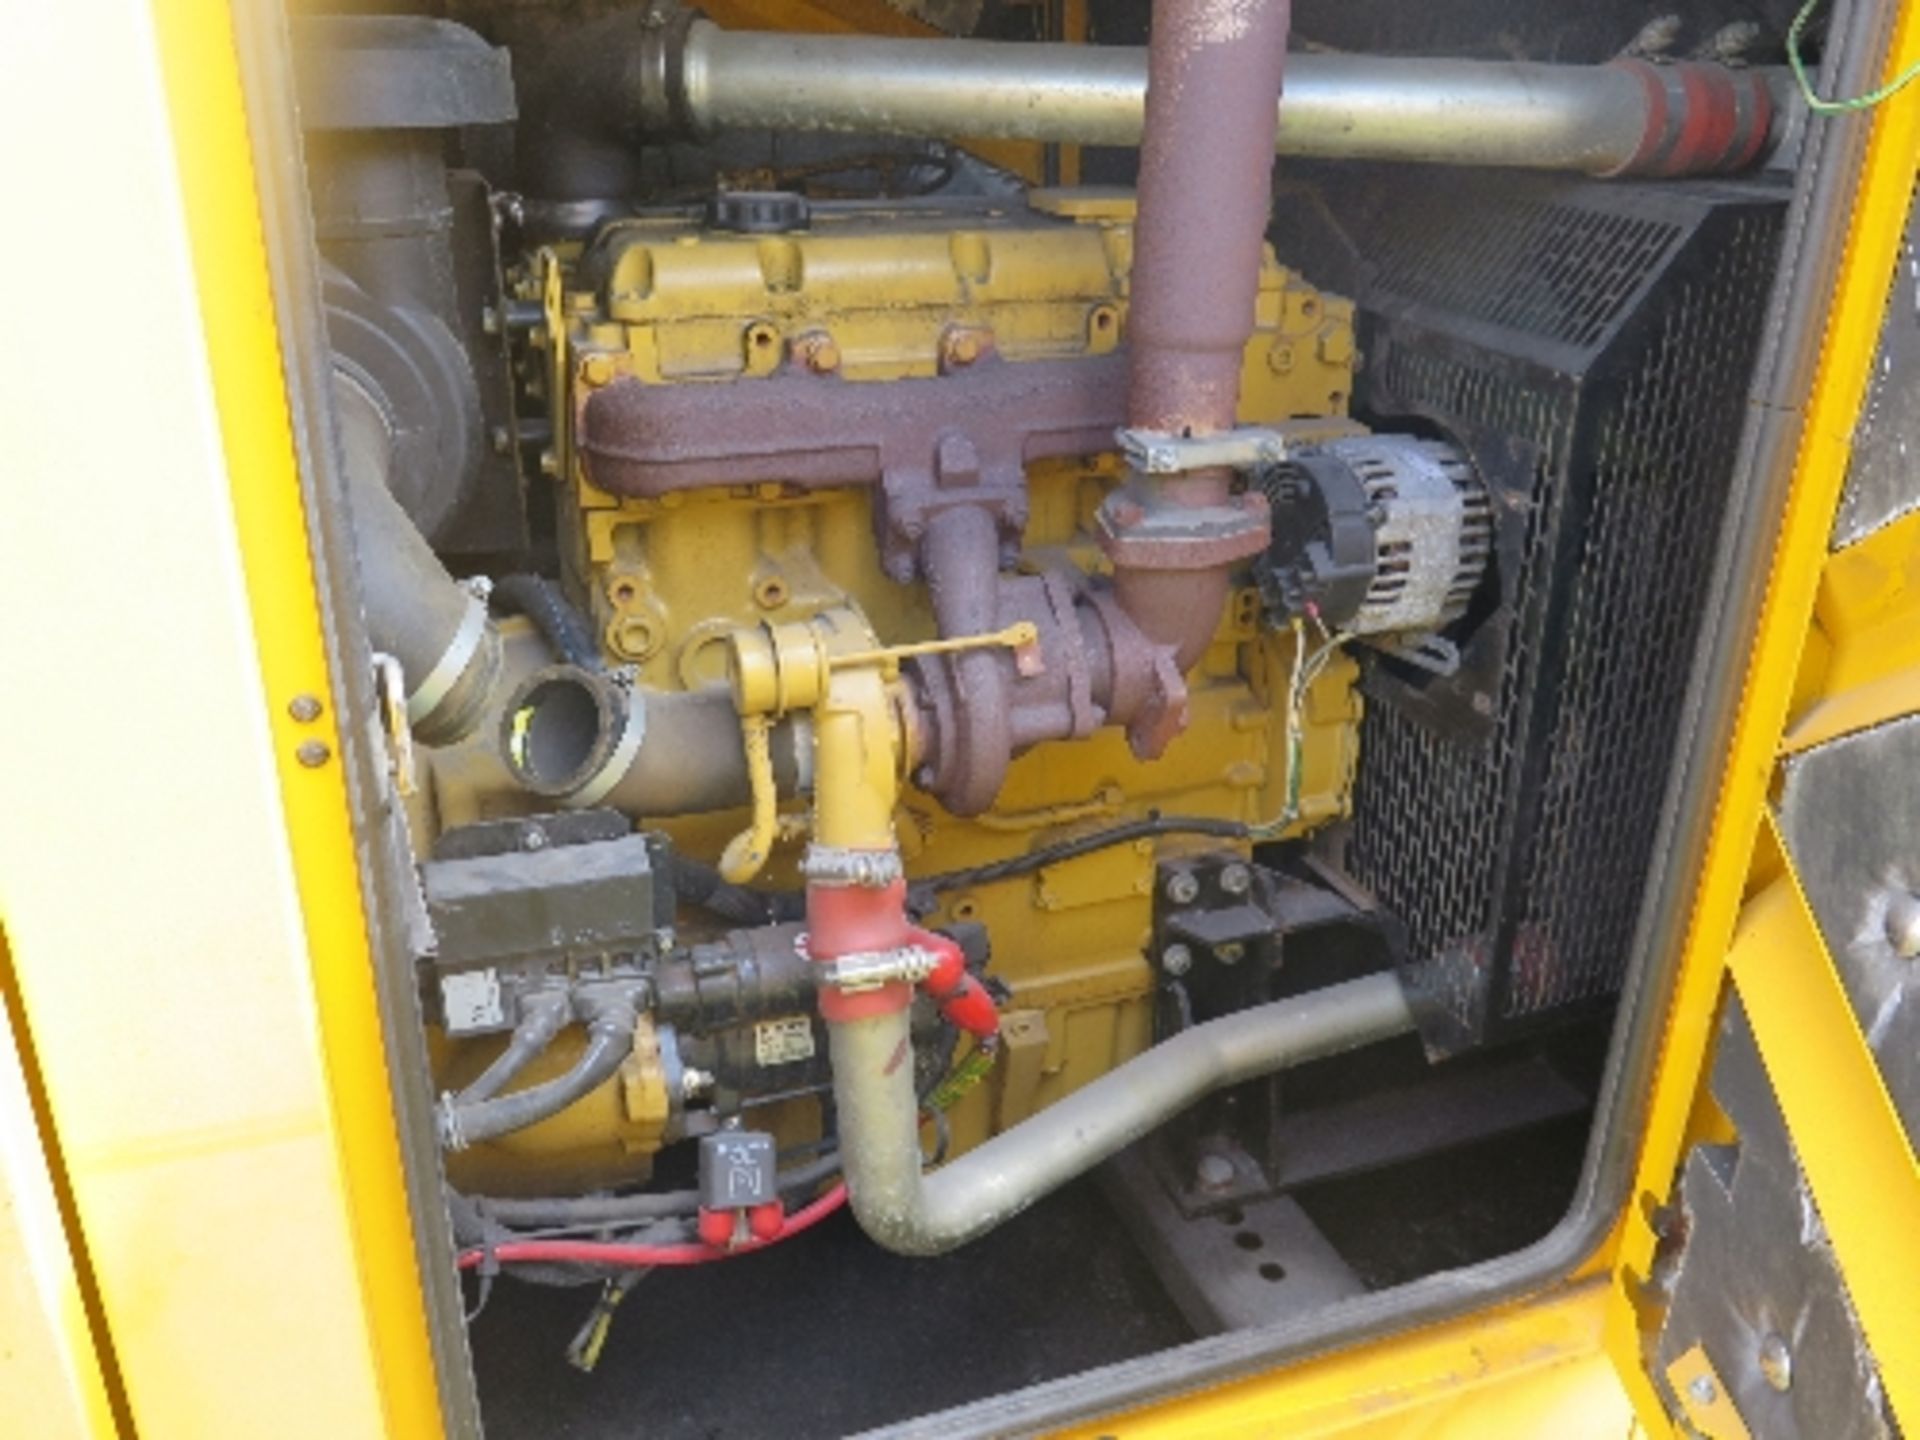 Caterpillar XQE80 generator 14217 hrs 5003860
PERKINS - TURNS OVER - CONTROL PANEL MISSING - MAIN - Image 6 of 6